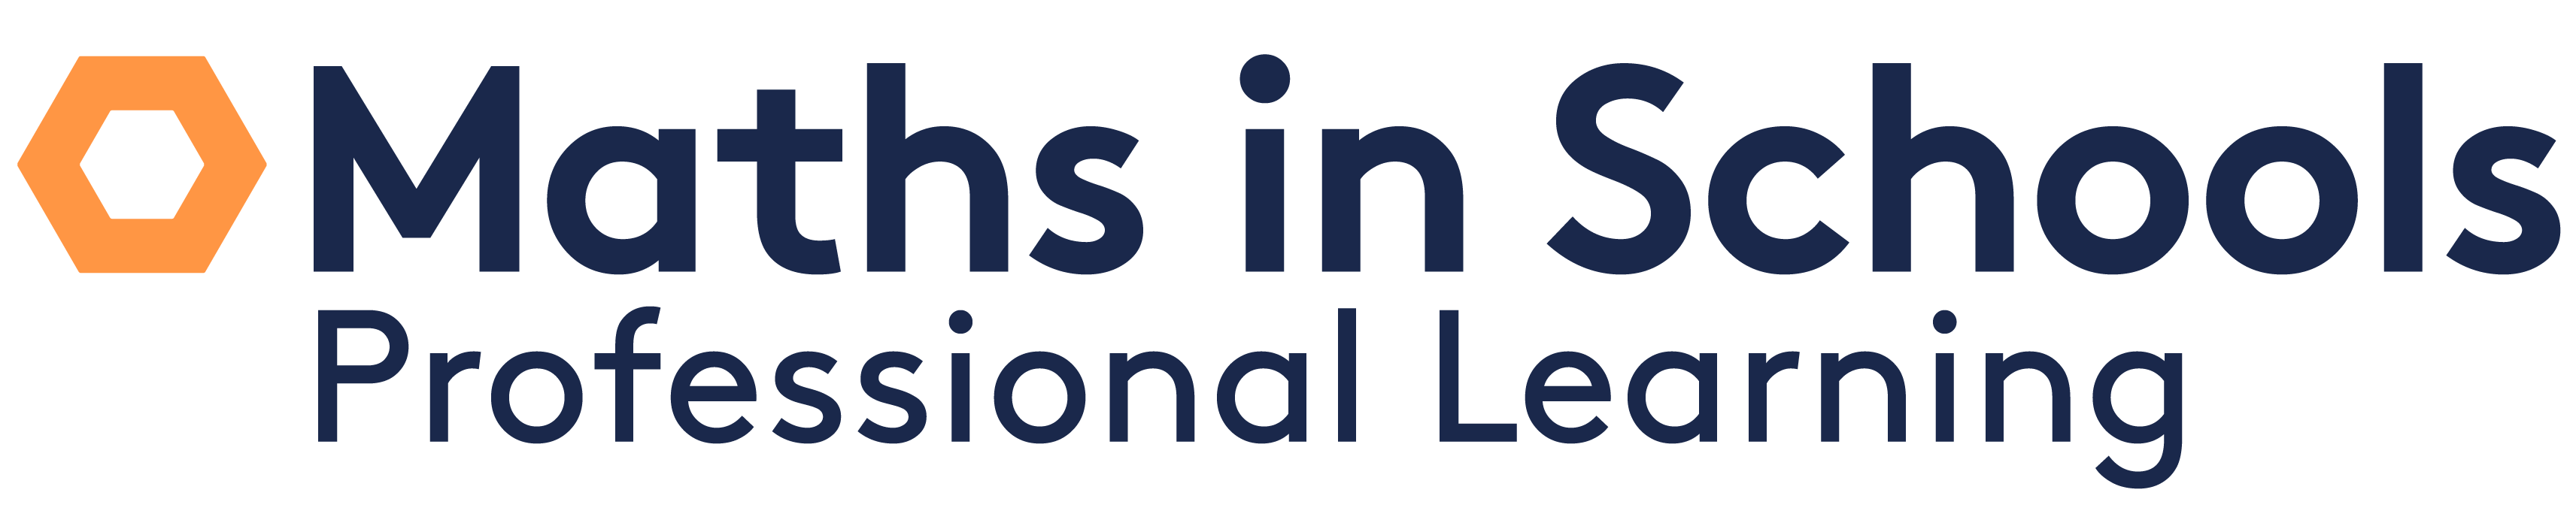 Maths in Schools Professional Learning logo